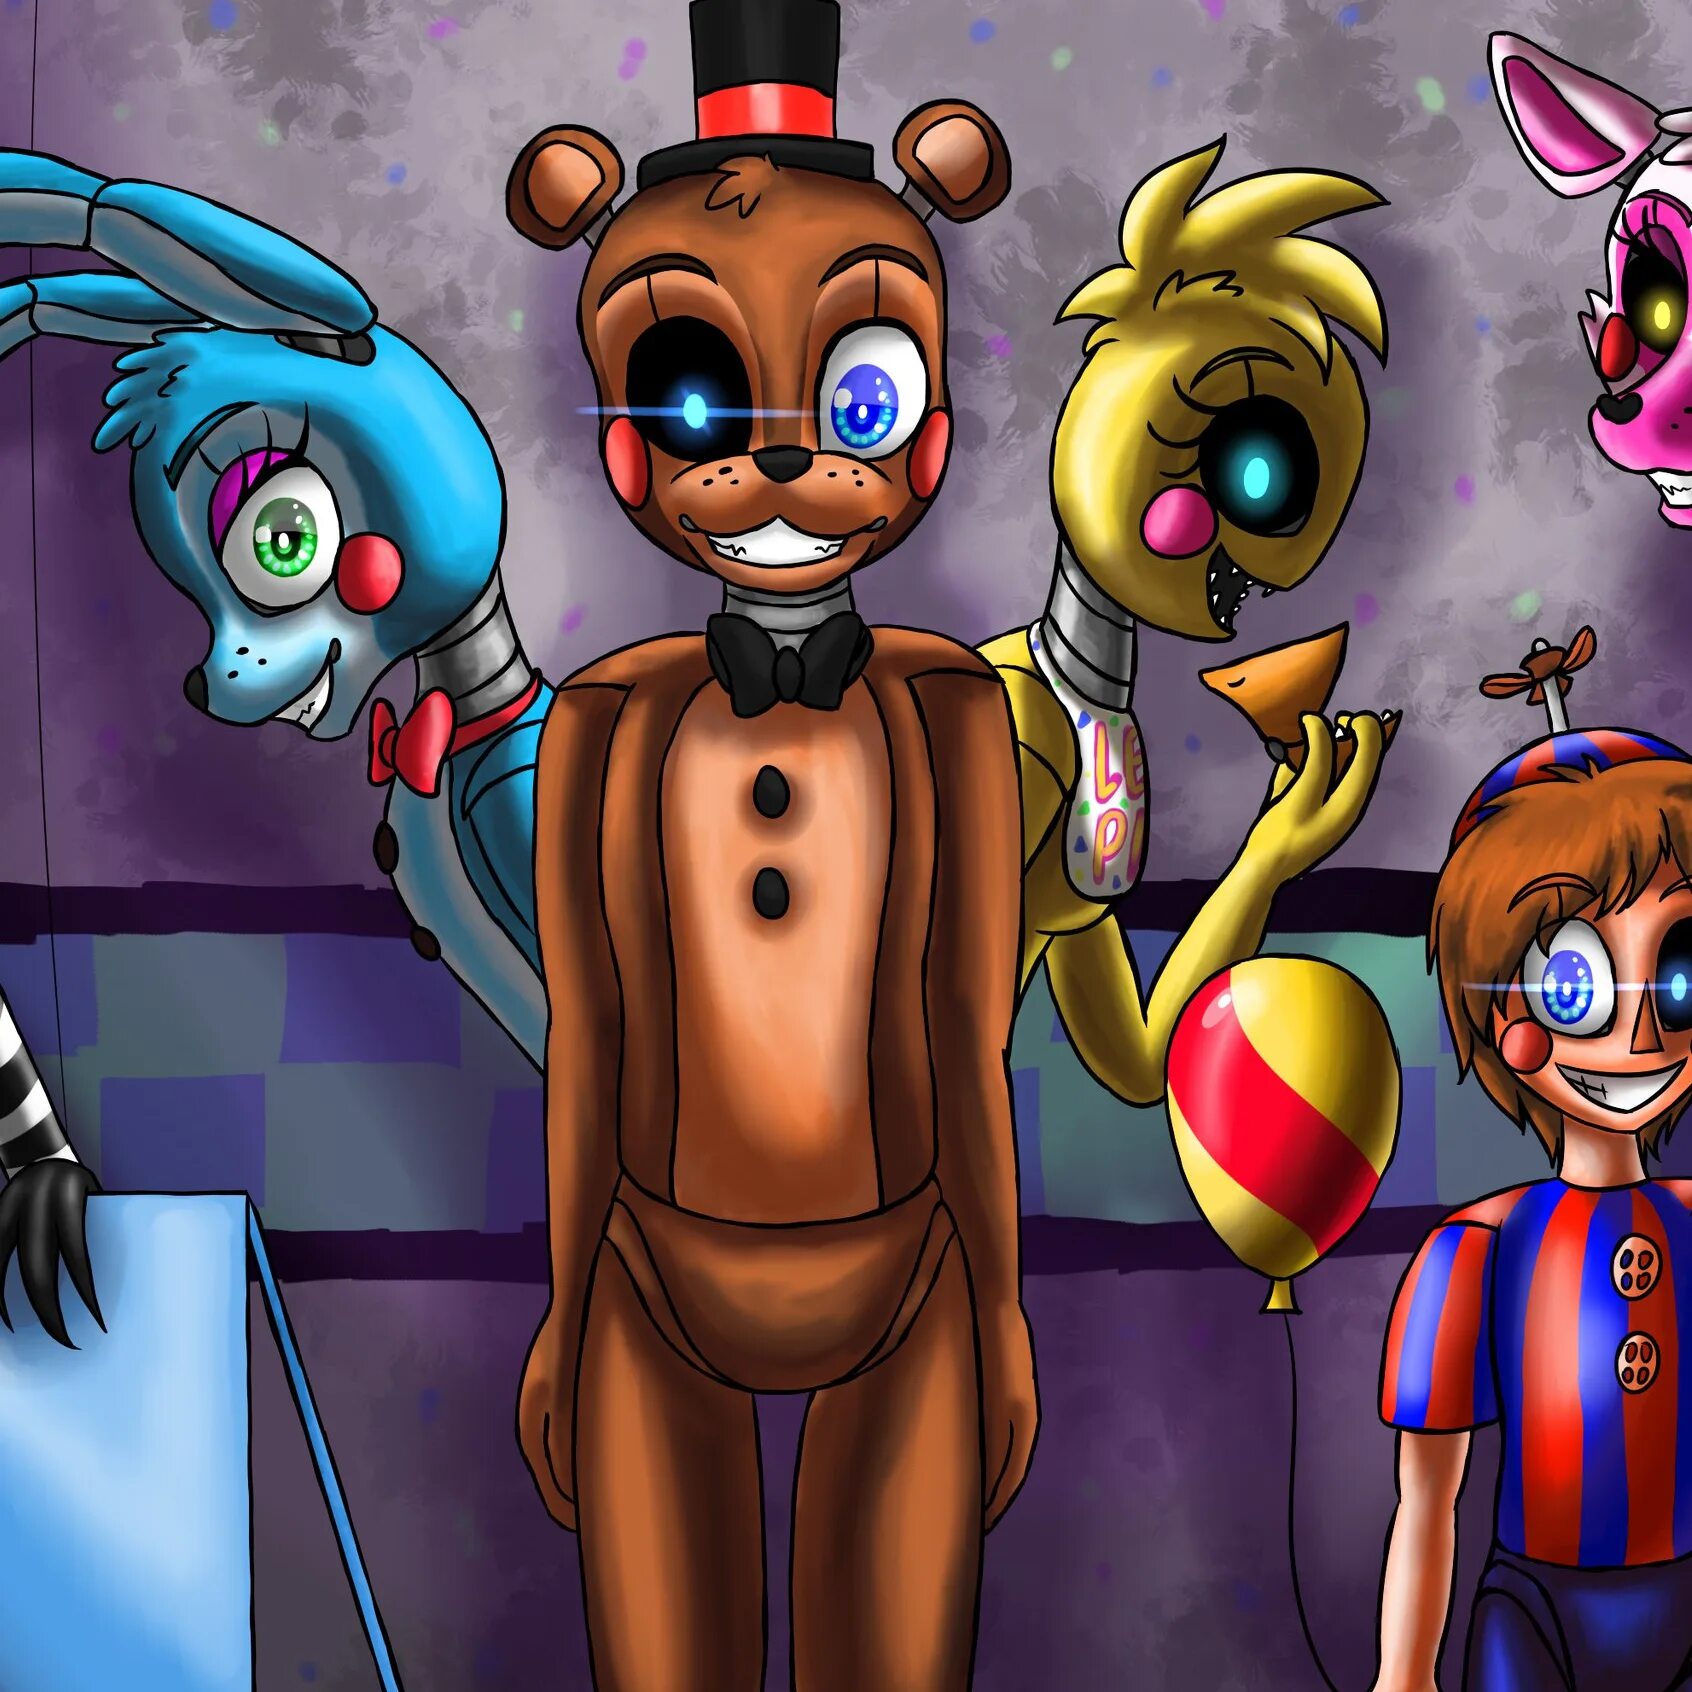 Five Nights at Freddy’s. АНИМАТРОНИКИ. АНИМАТРОНИКИ мультяшка.